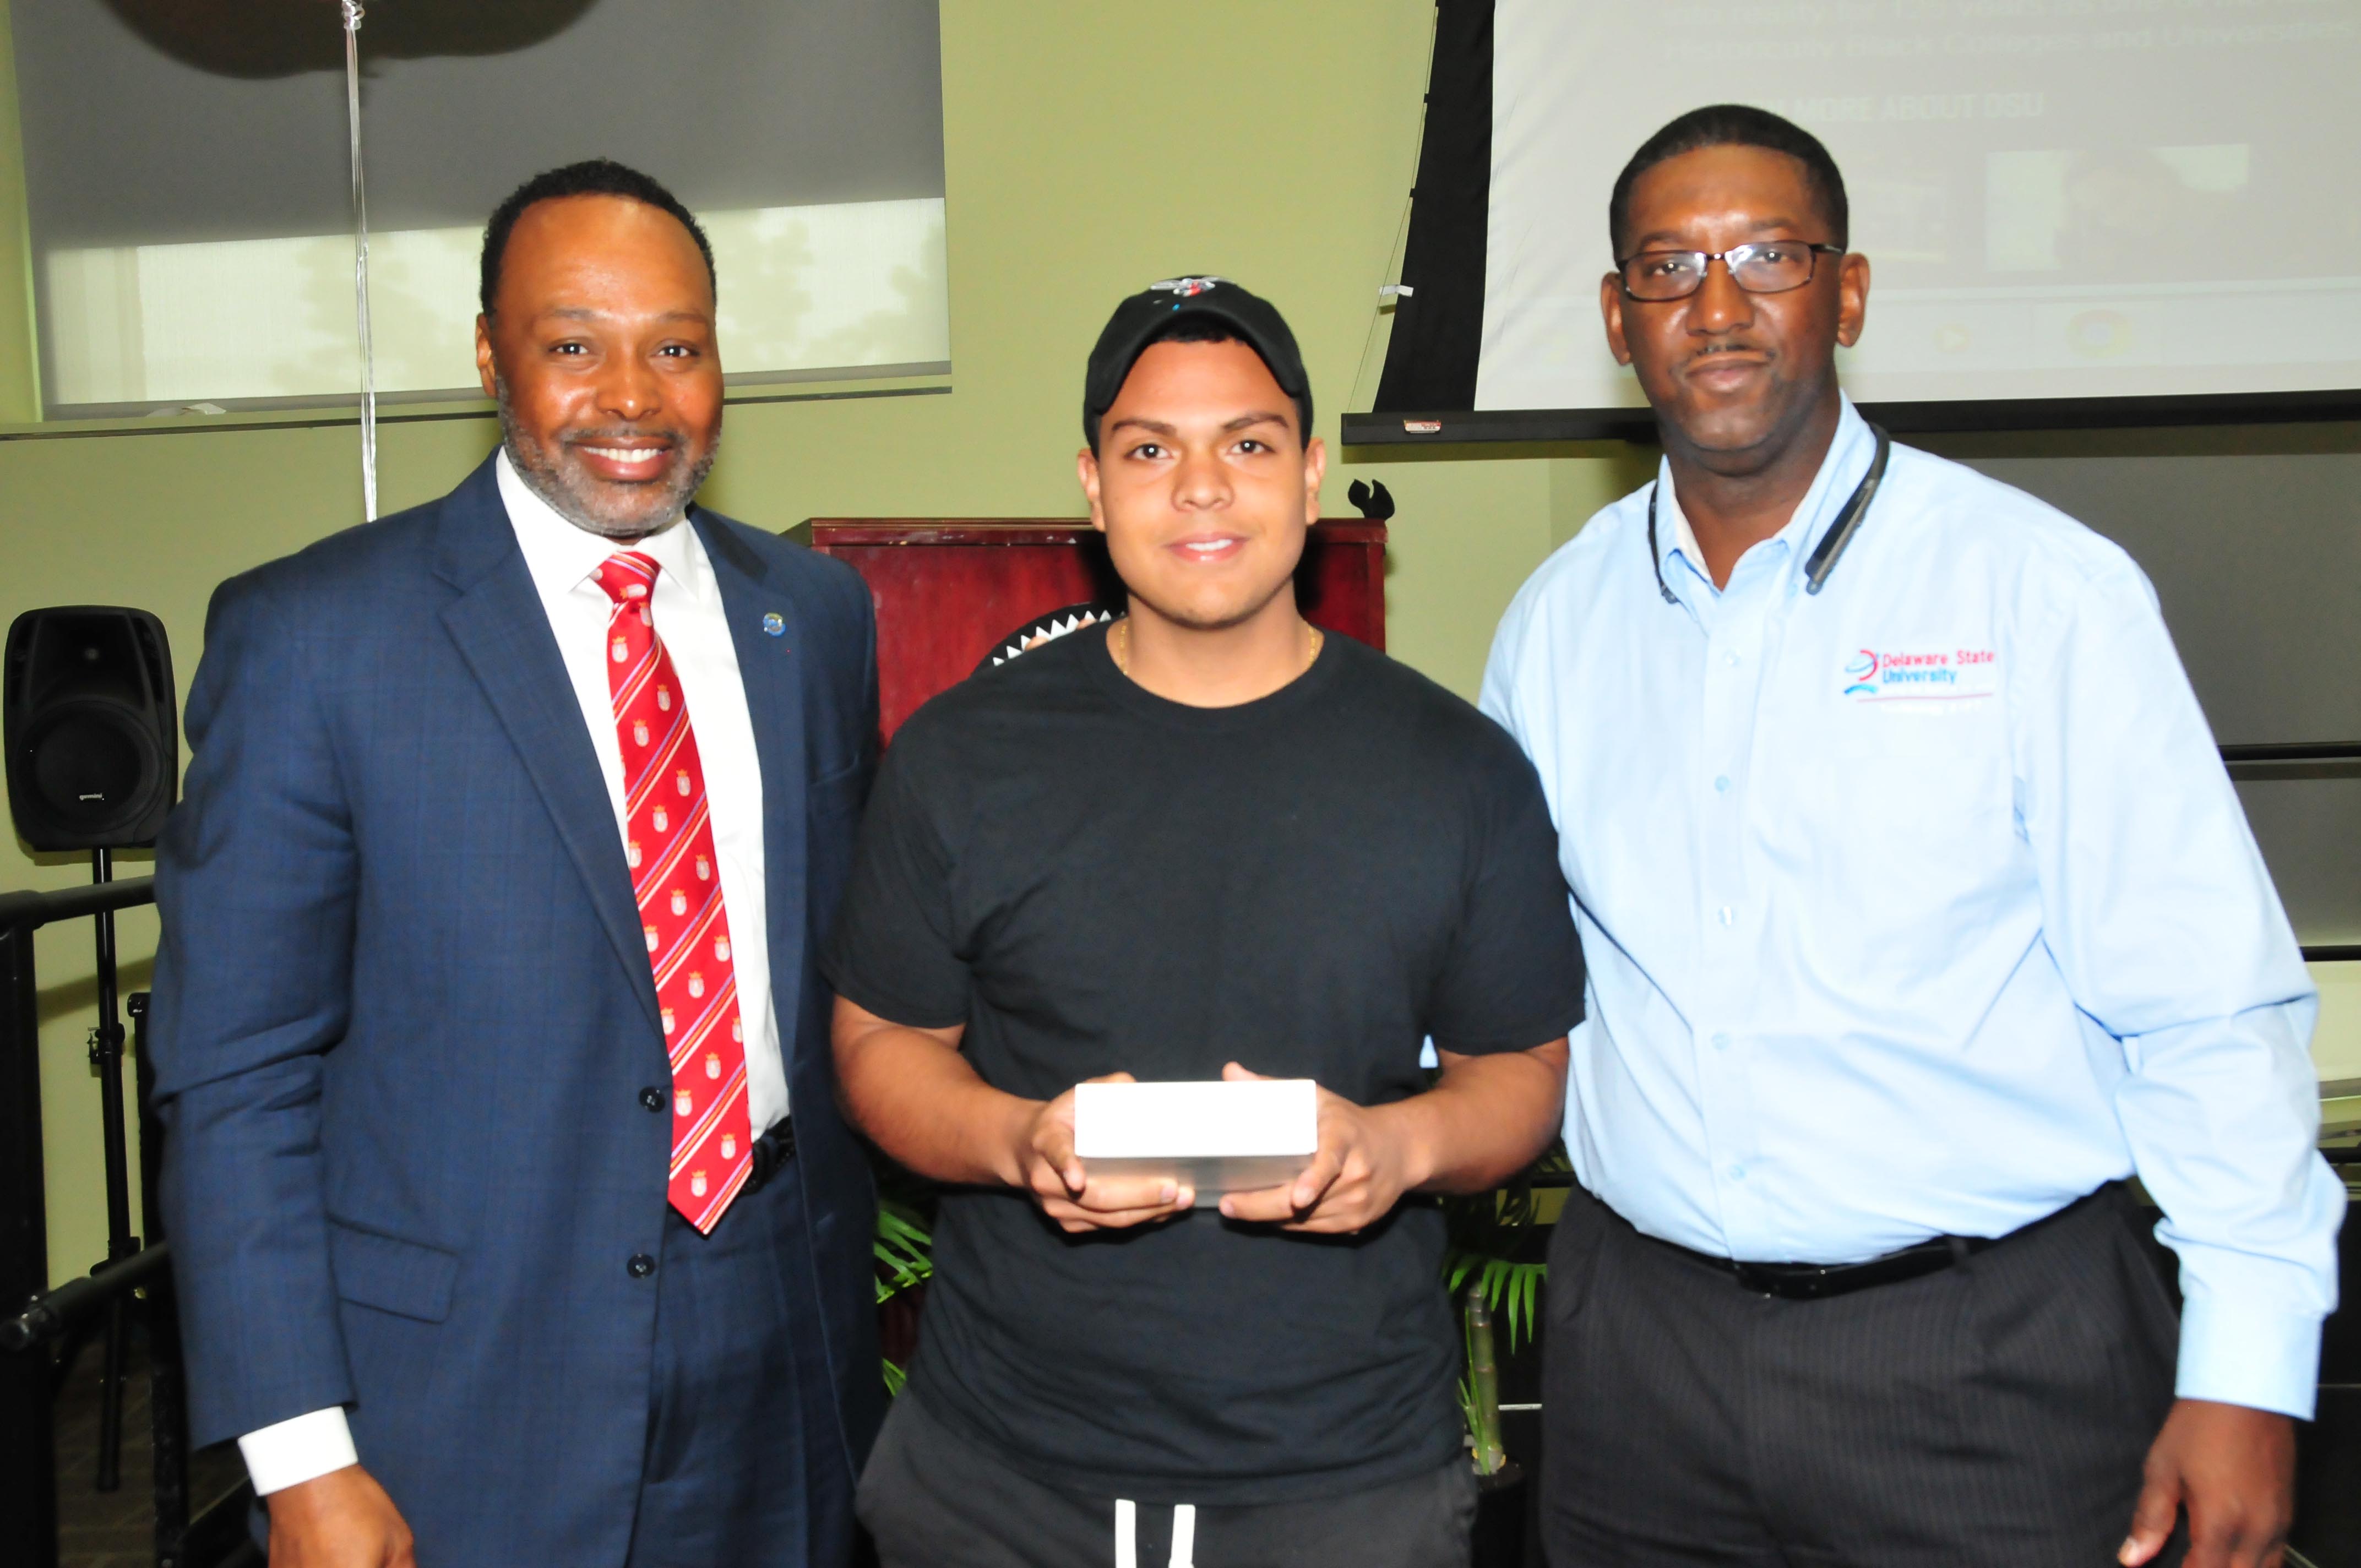 Kevin Coque Alarcon, a freshman mass communications major (center), won a digital drawing and took home an iPad Mini. Standing with him are keynote speaker James Collins (l) and DSU CIO Darrell McMillon.